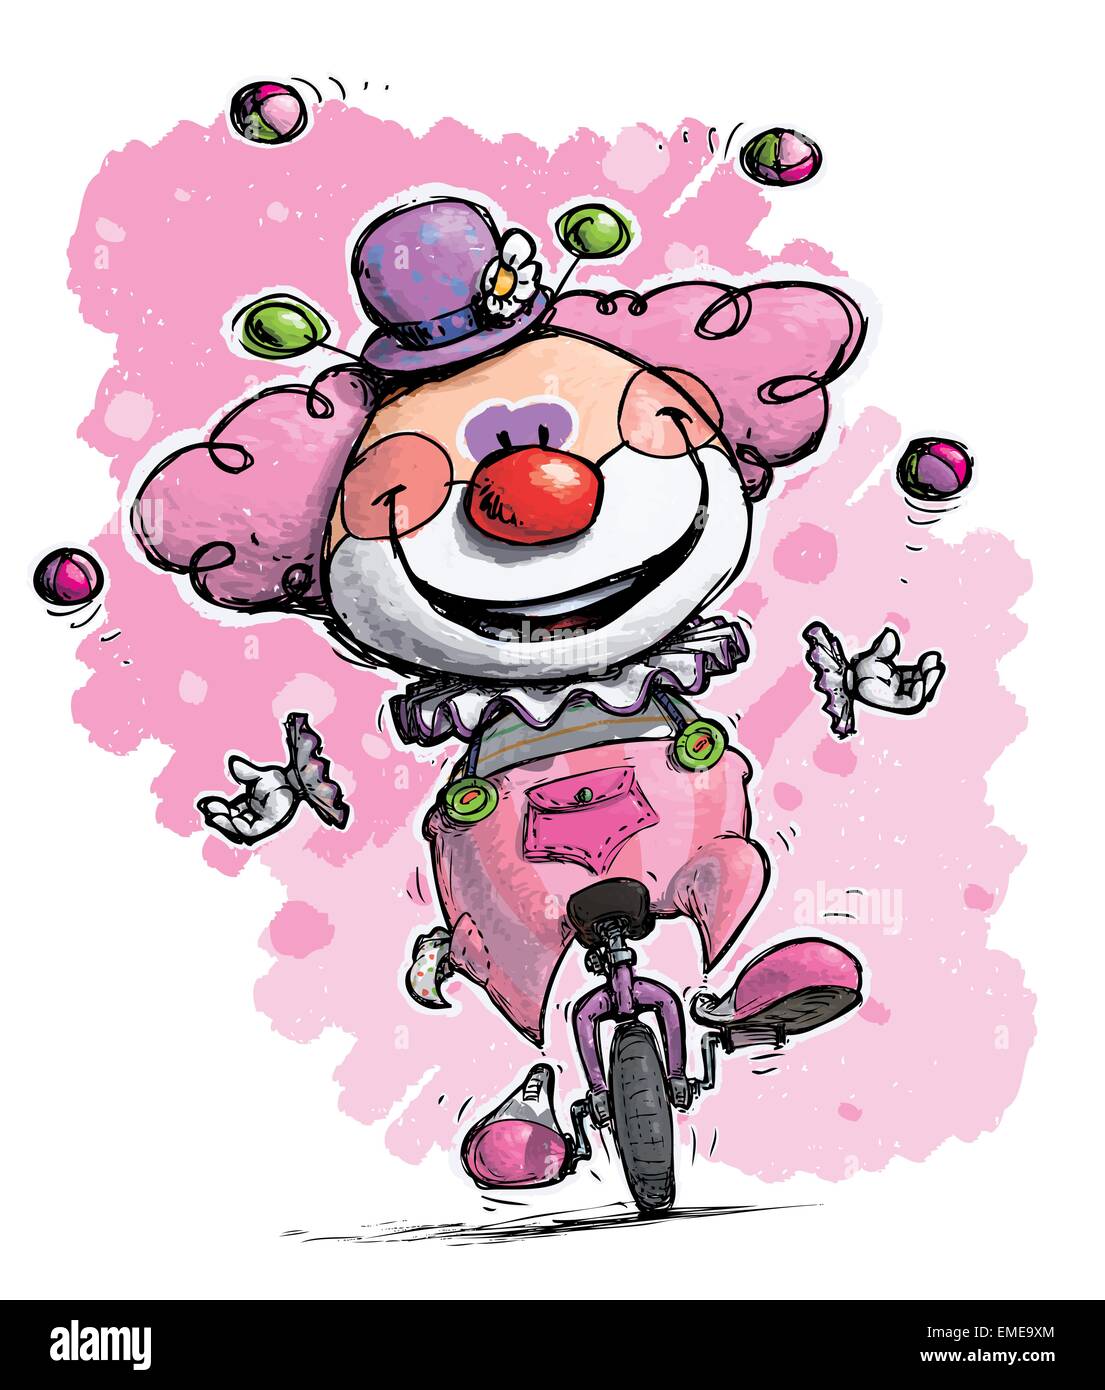 Clown on Unicycle Juggling Girlie Colors Stock Vector